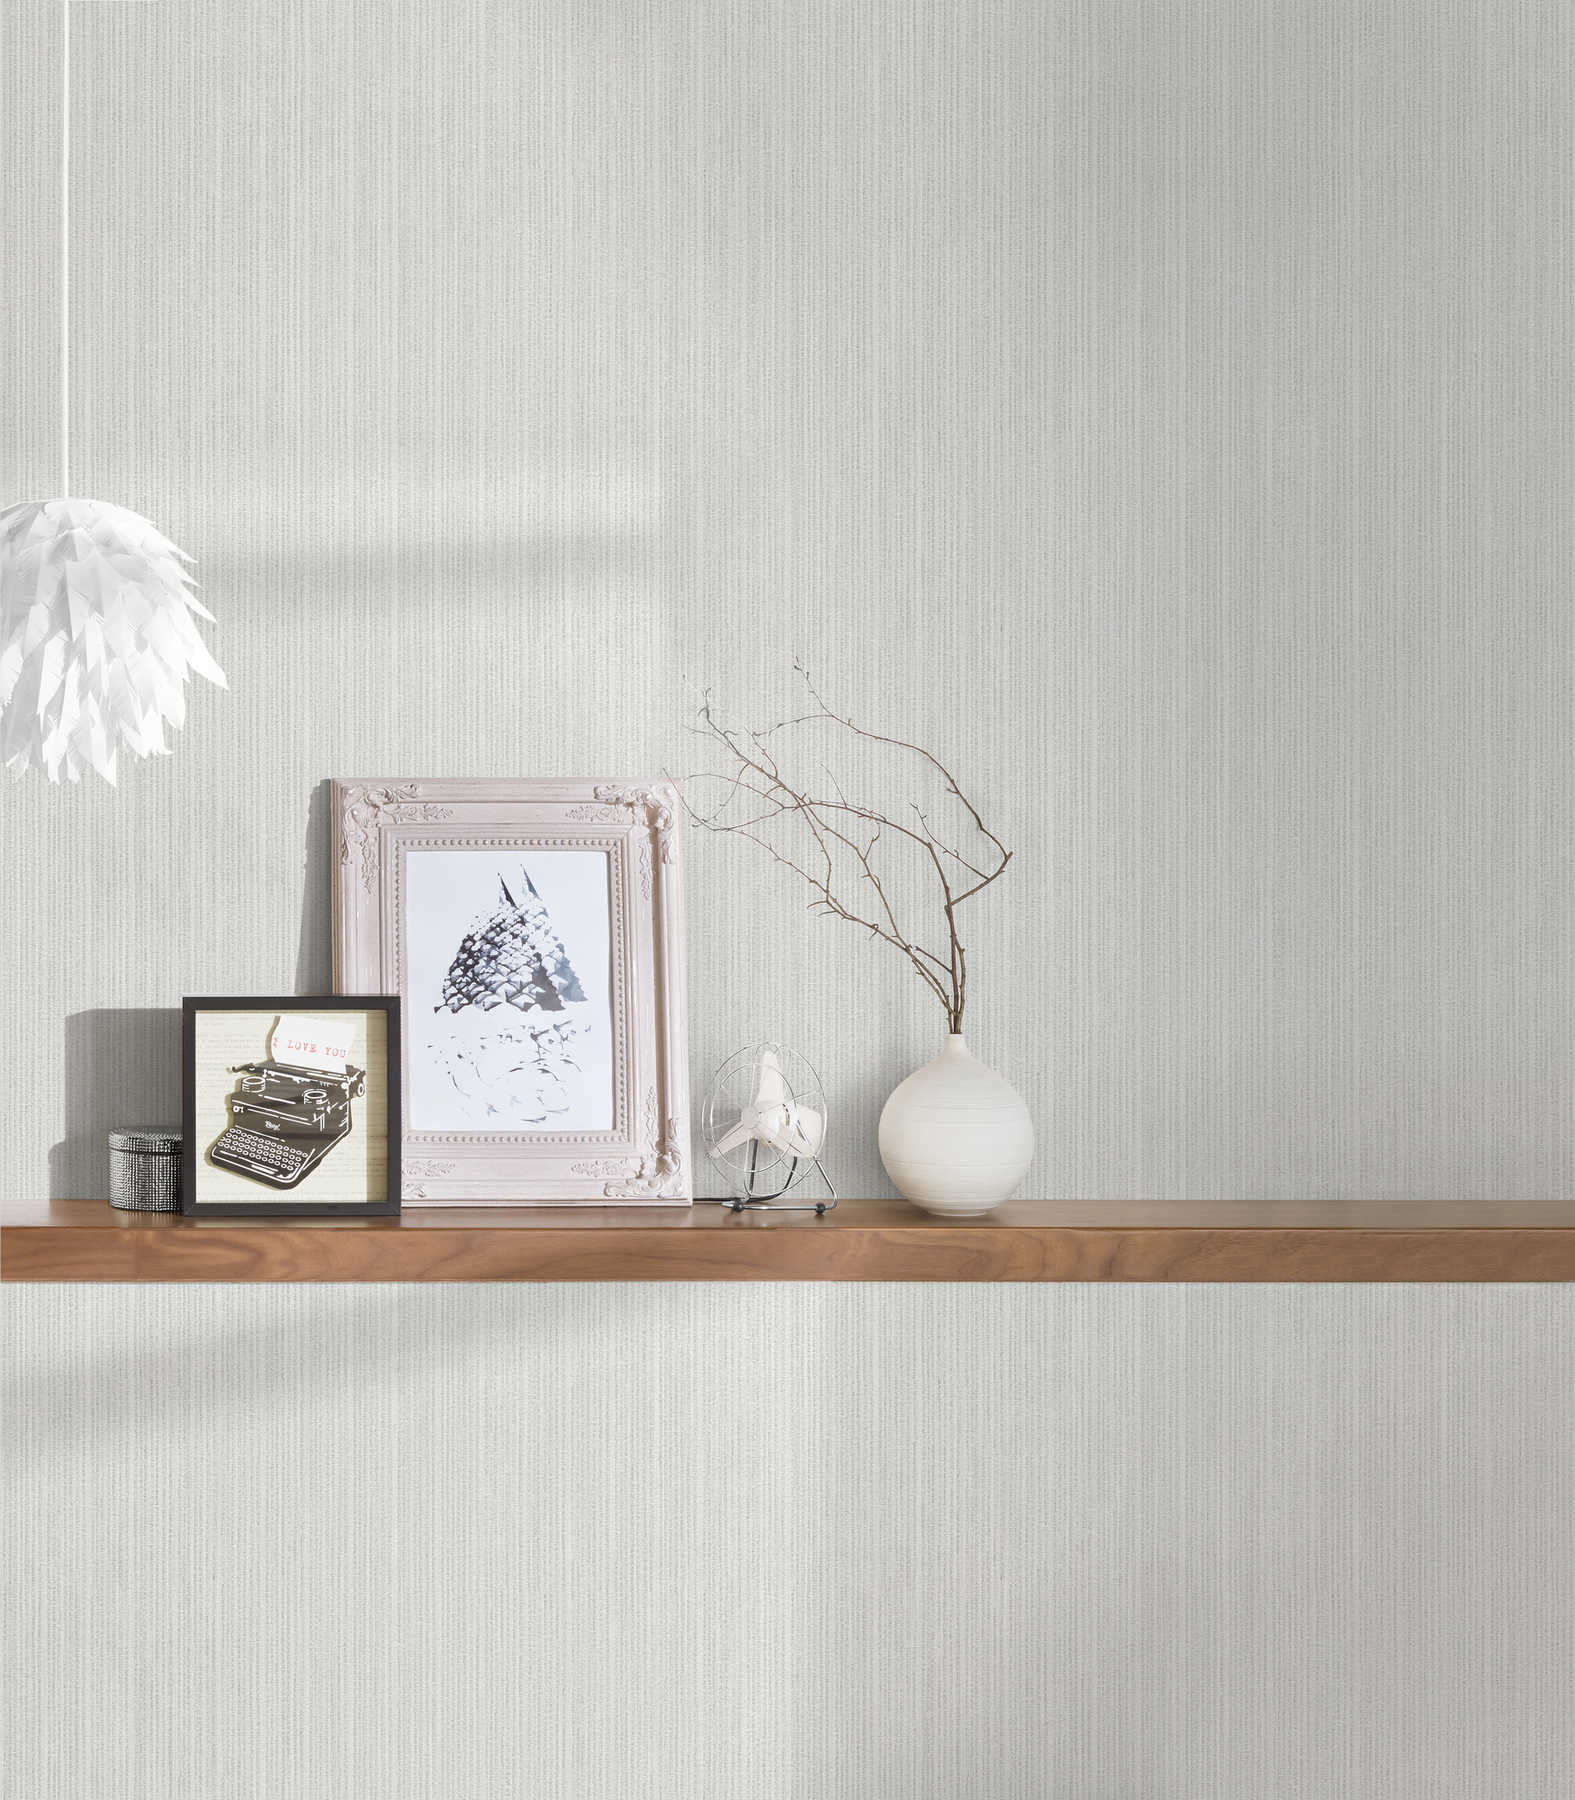             Non-woven wallpaper with grain and line structure - grey
        